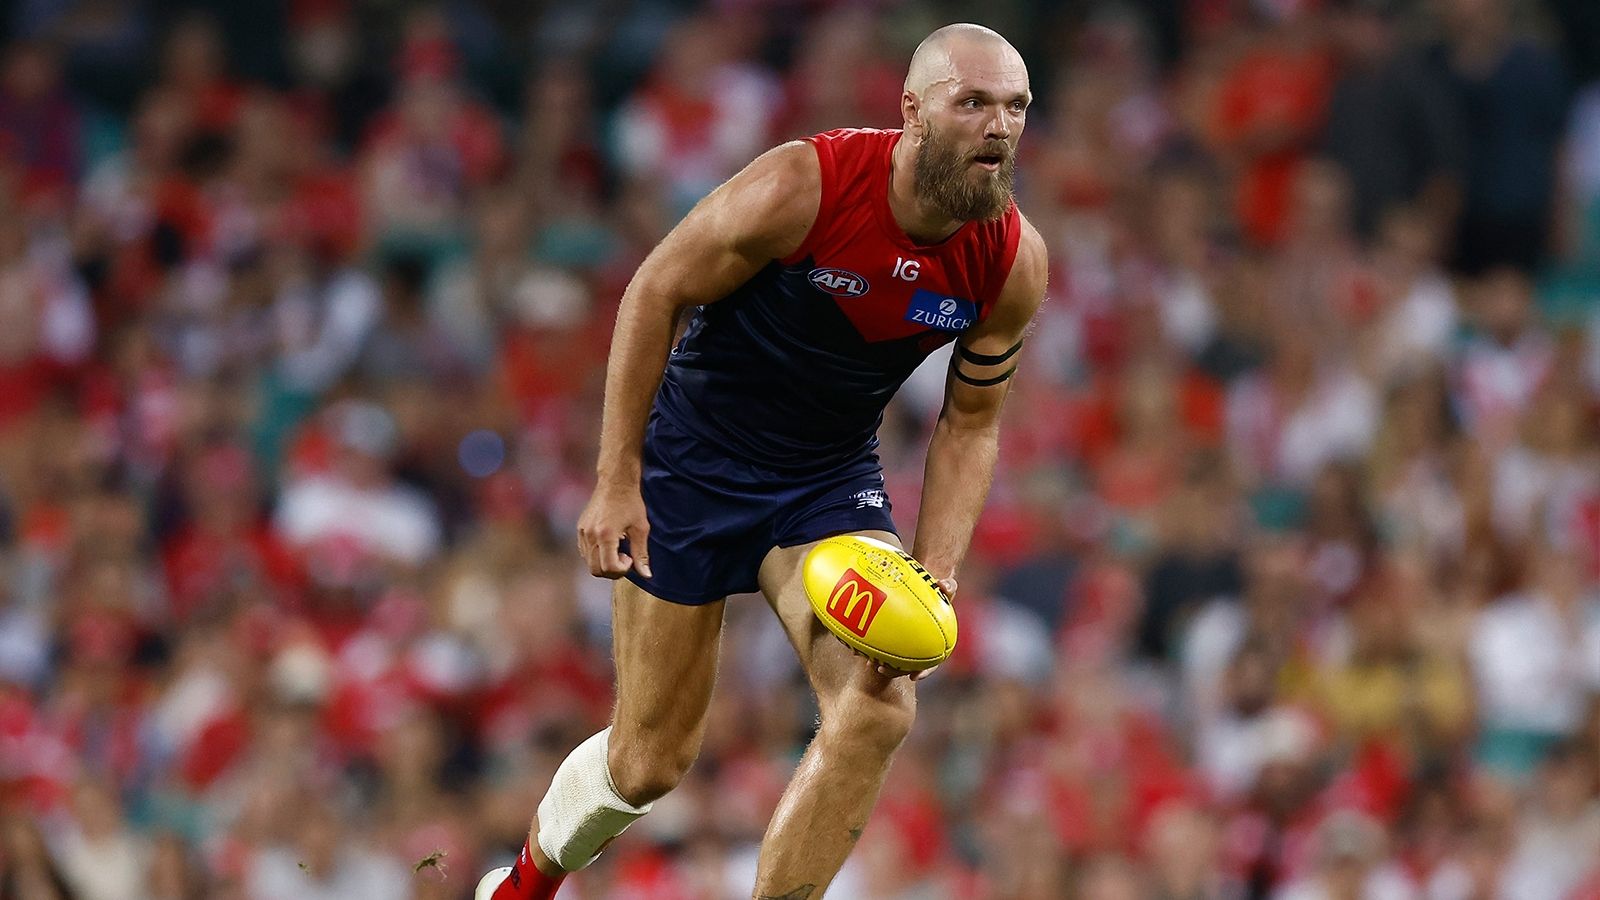 How to watch today’s Melbourne Demons vs Brisbane Lions AFL match: Livestream, TV channel, and start time | Goal.com Australia